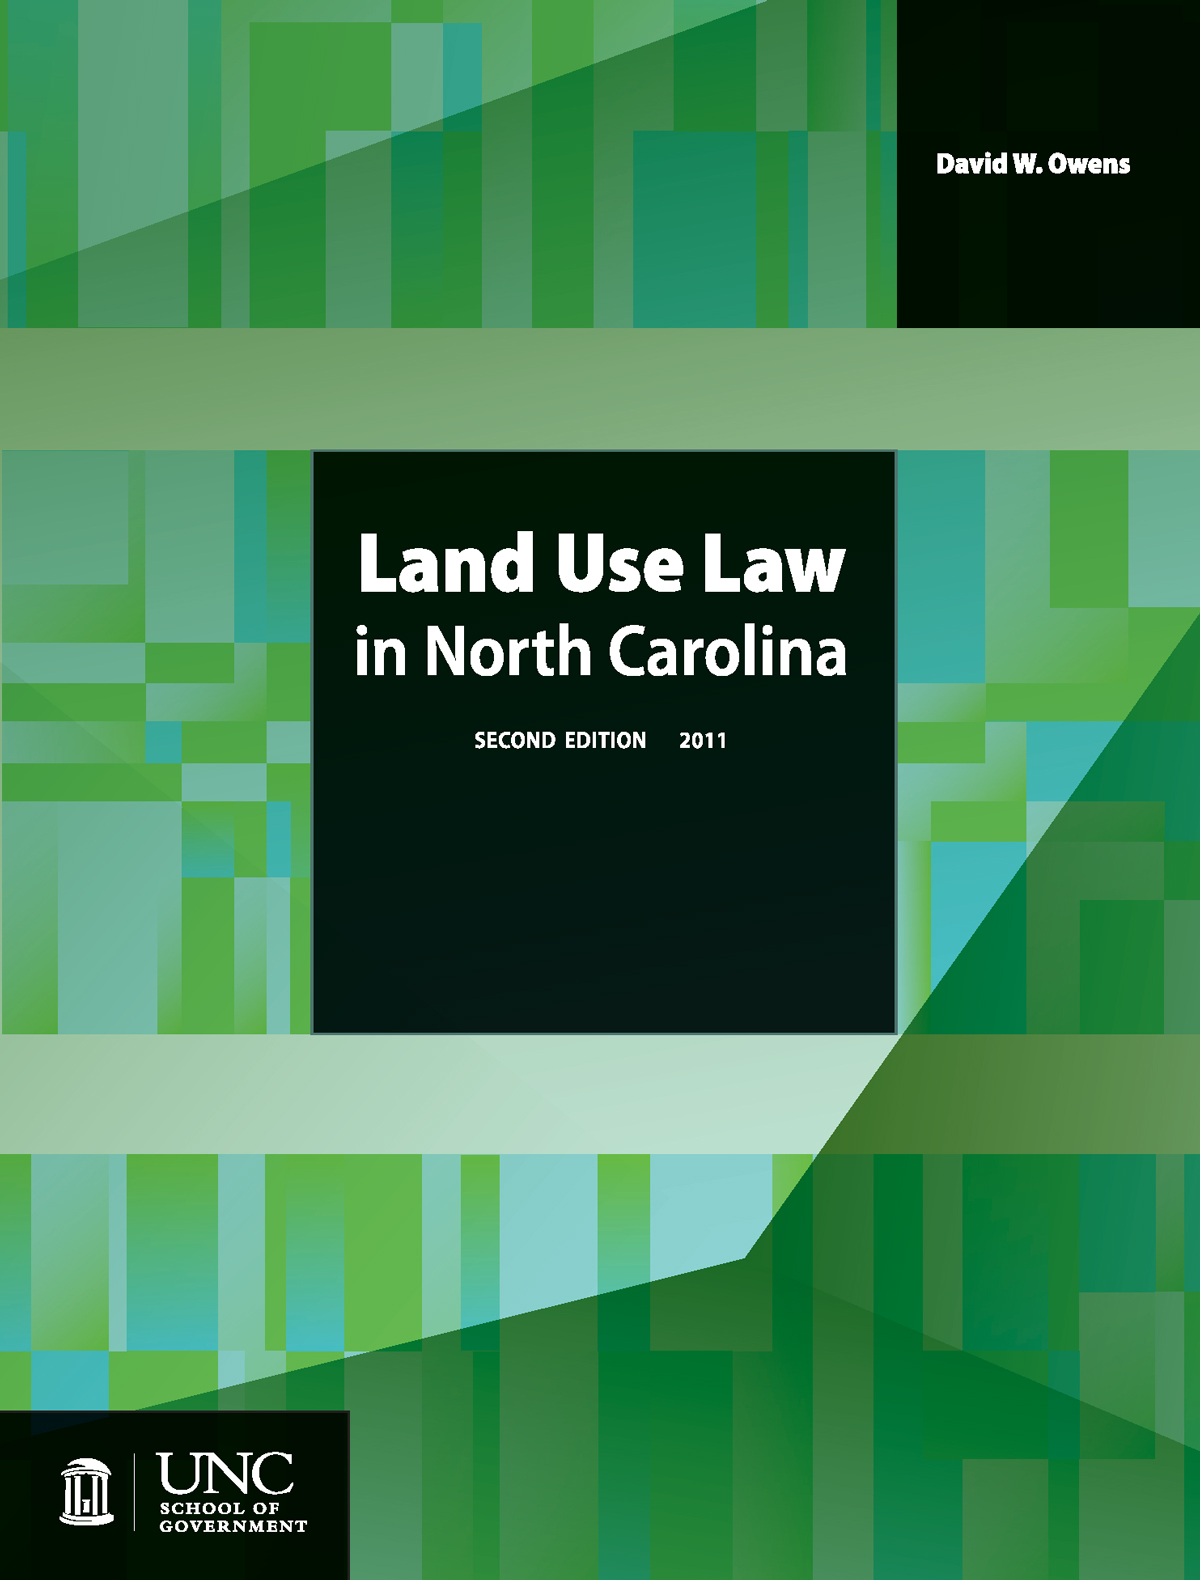 Land Use Law in North Carolina, Second Edition, 2011